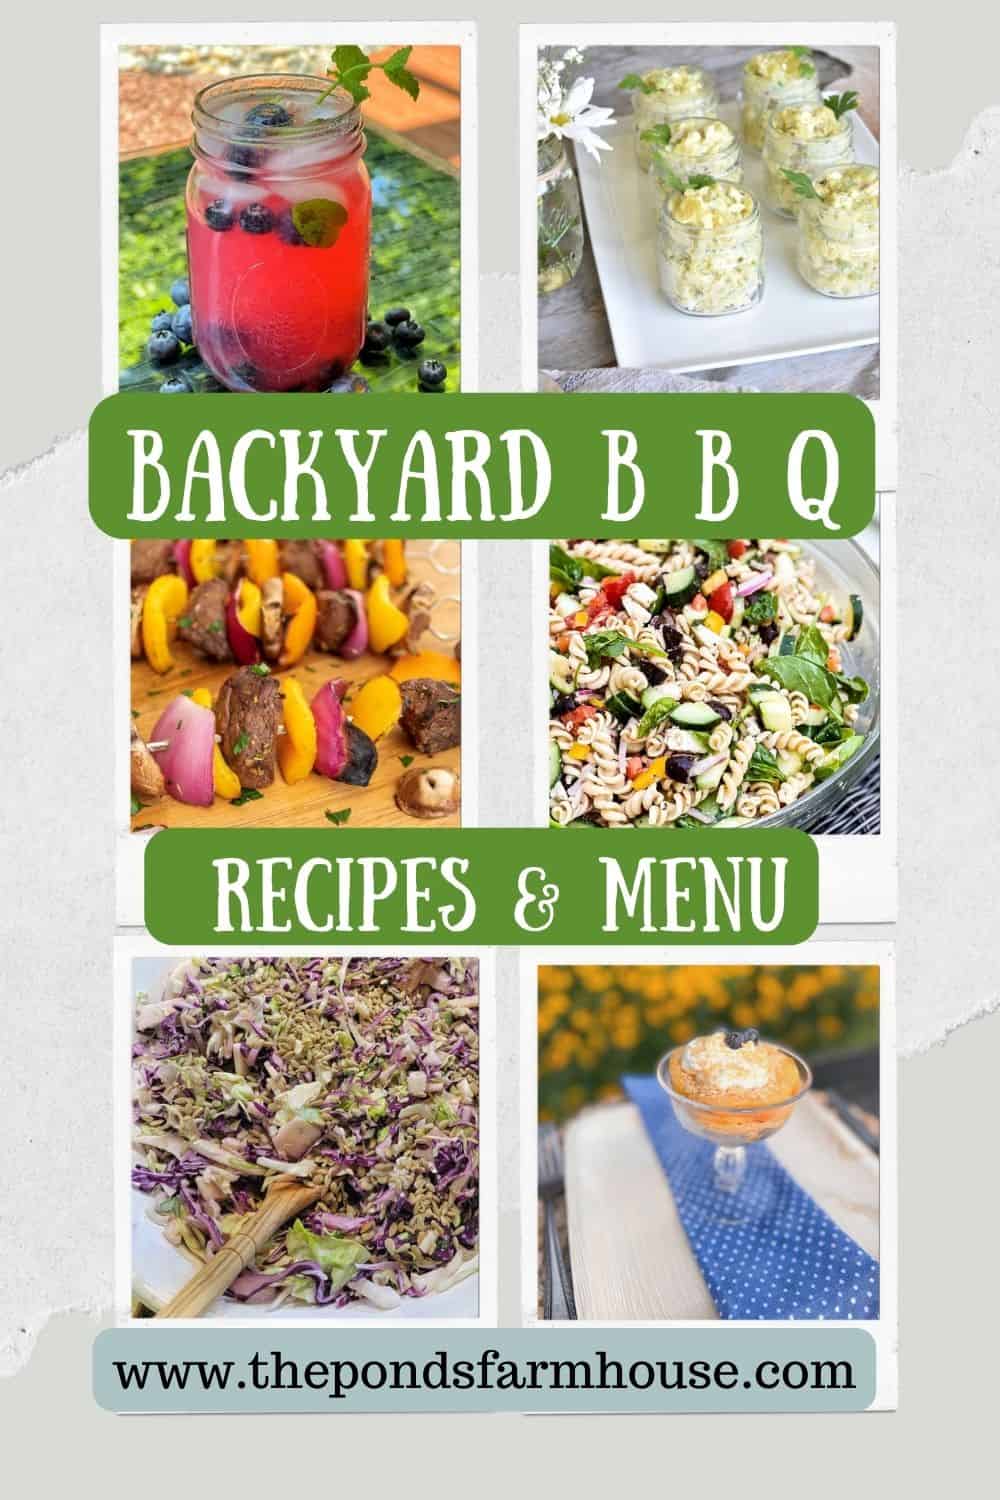 Recipes and menu for backyard bbq, outdoor dinner party, supper club alfresco dinner, cookout menu.